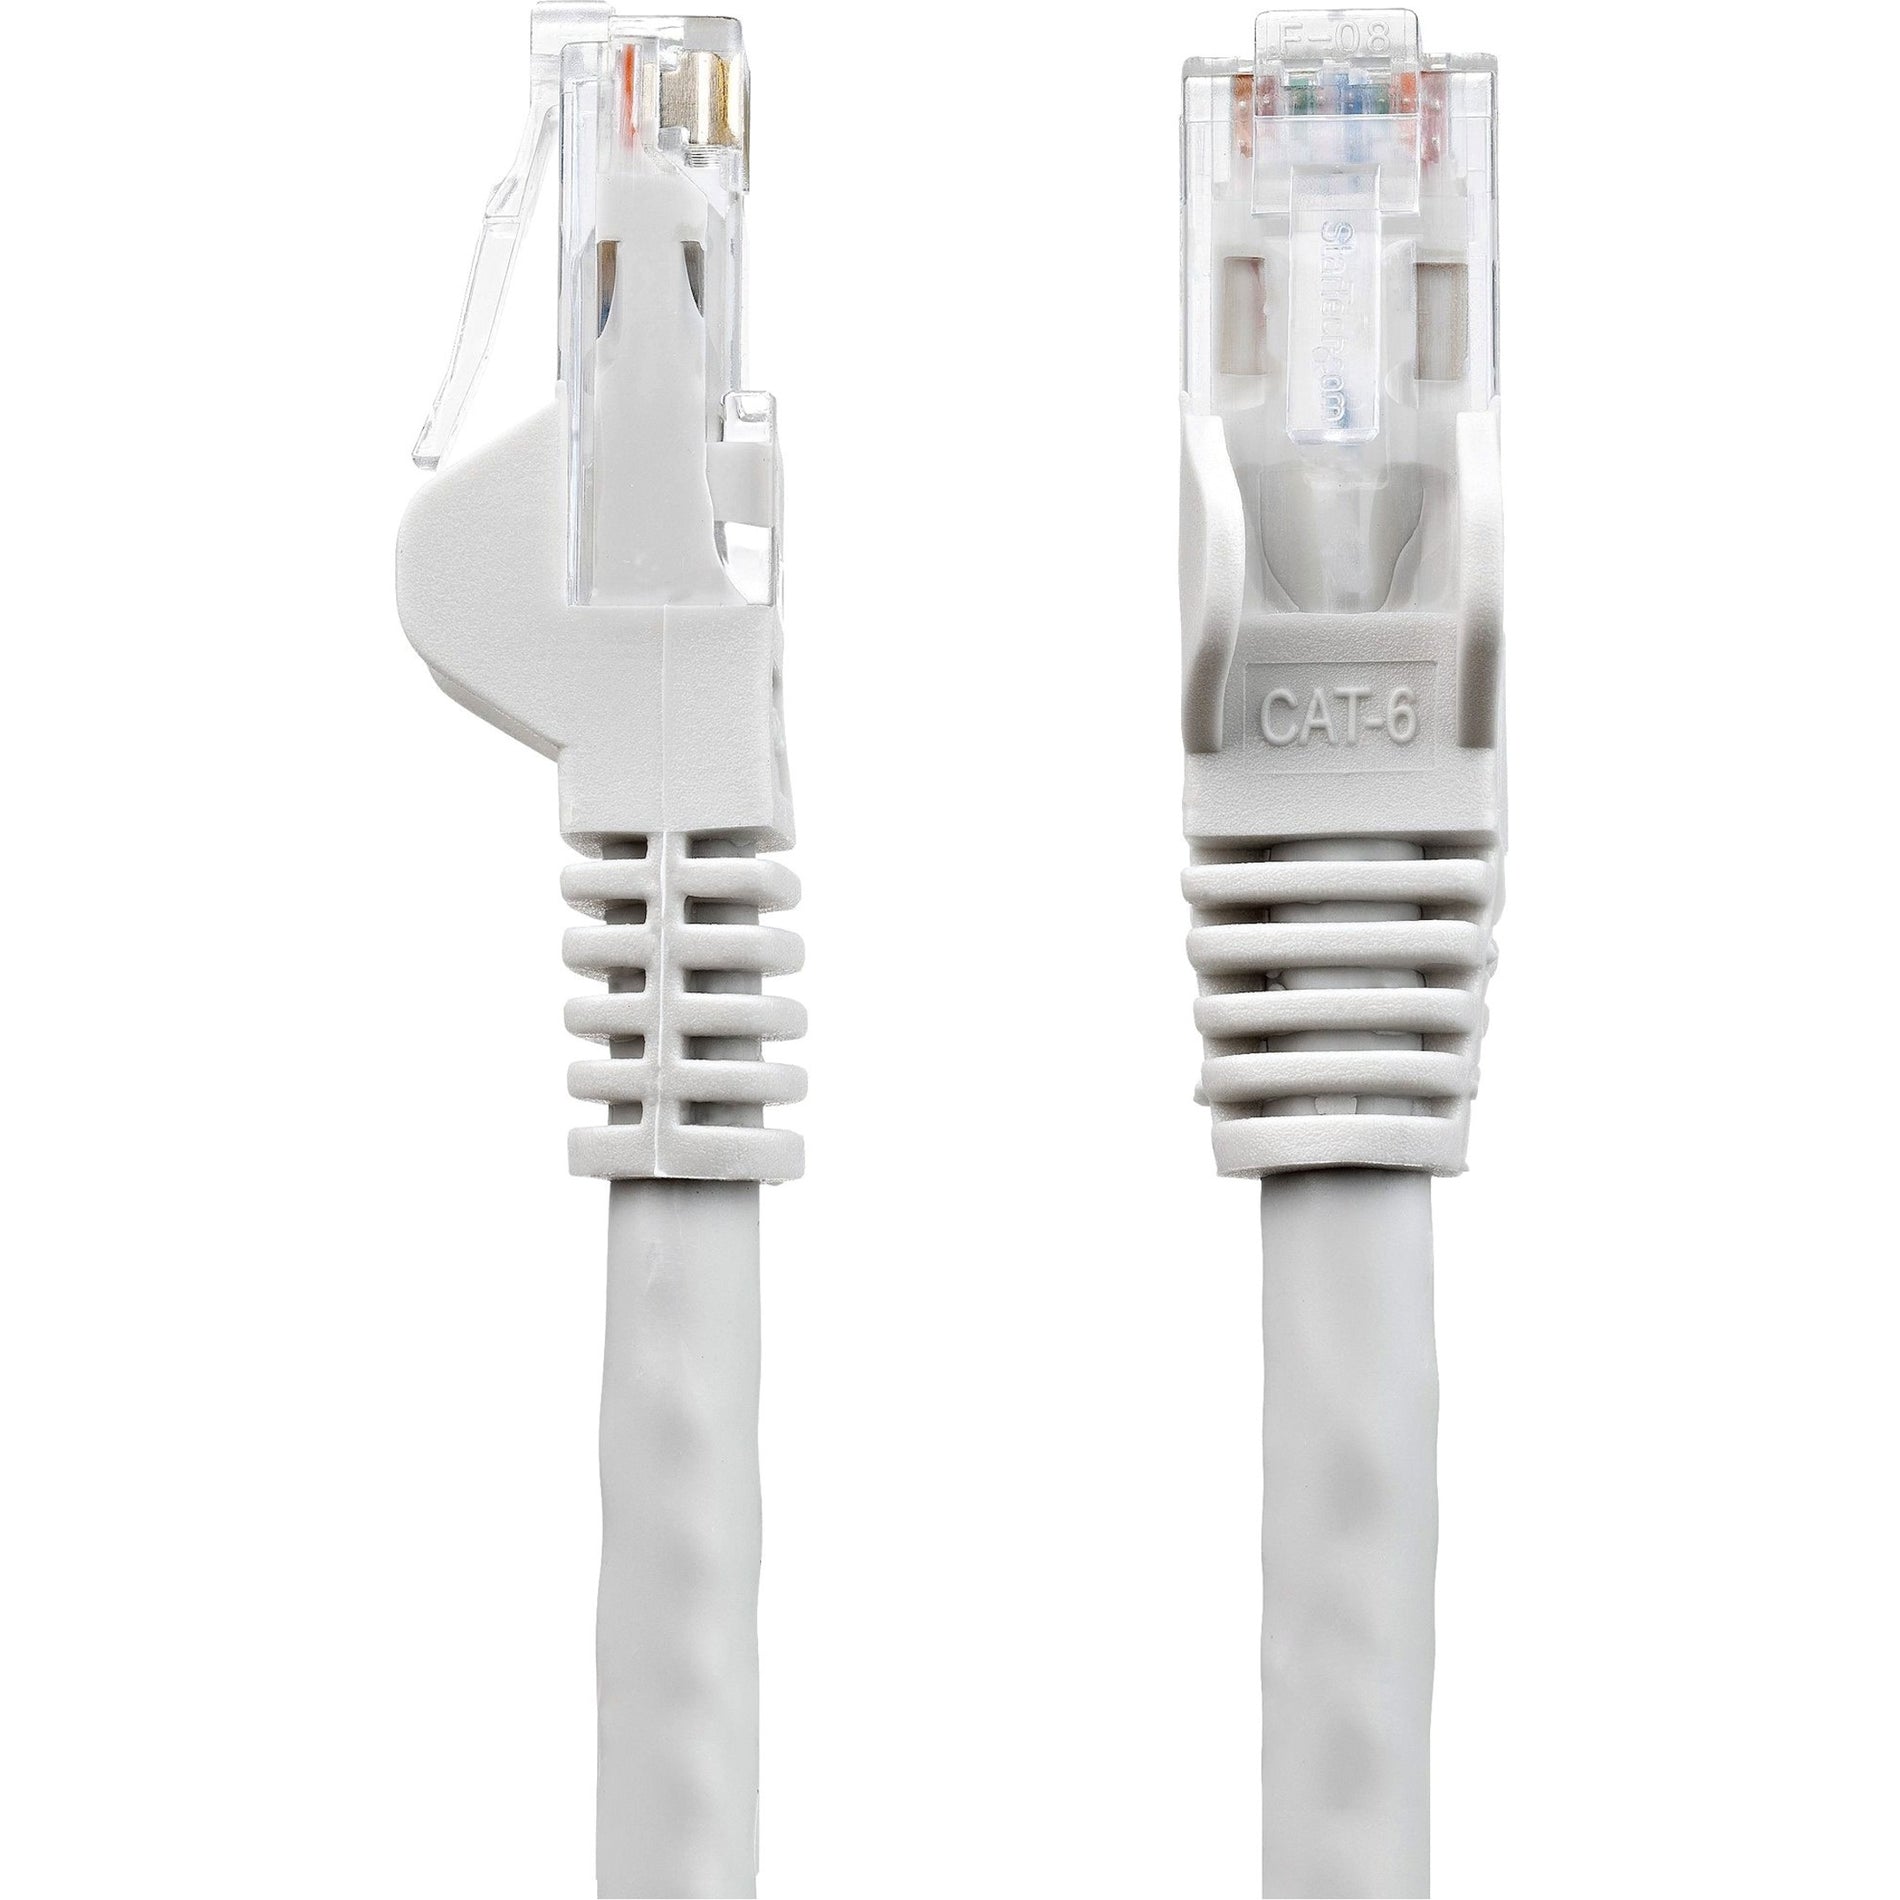 StarTech.com N6PATCH2GR Cat6 Network Cable, 2ft Gray Ethernet Cable, Snagless RJ45 Connectors